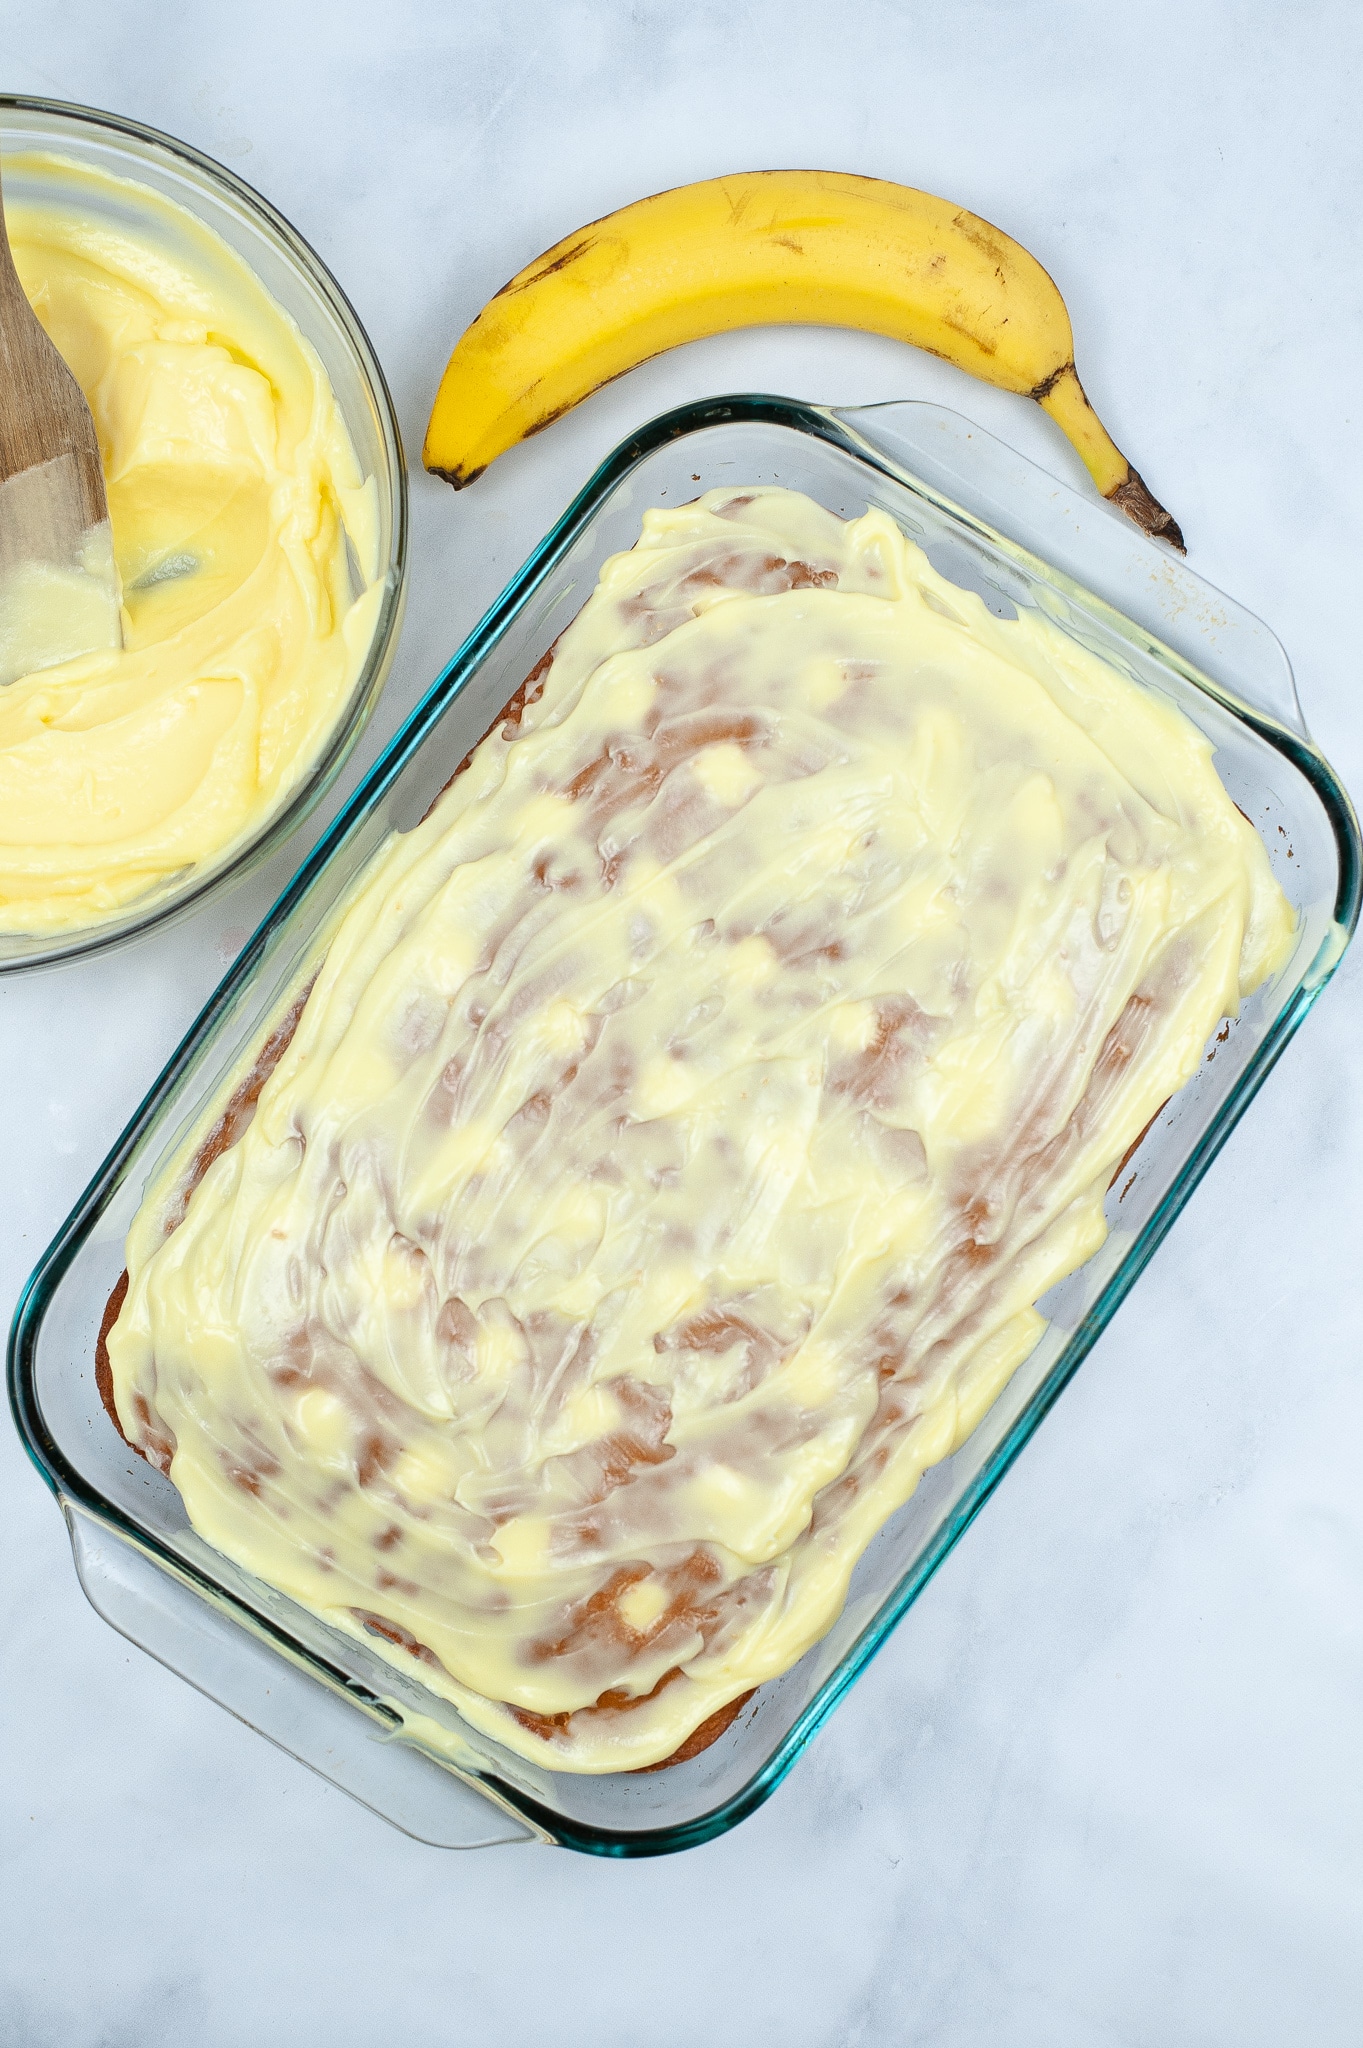 banana poke cake with pudding on top next to a banana and more pudding mixture in a glass bowl